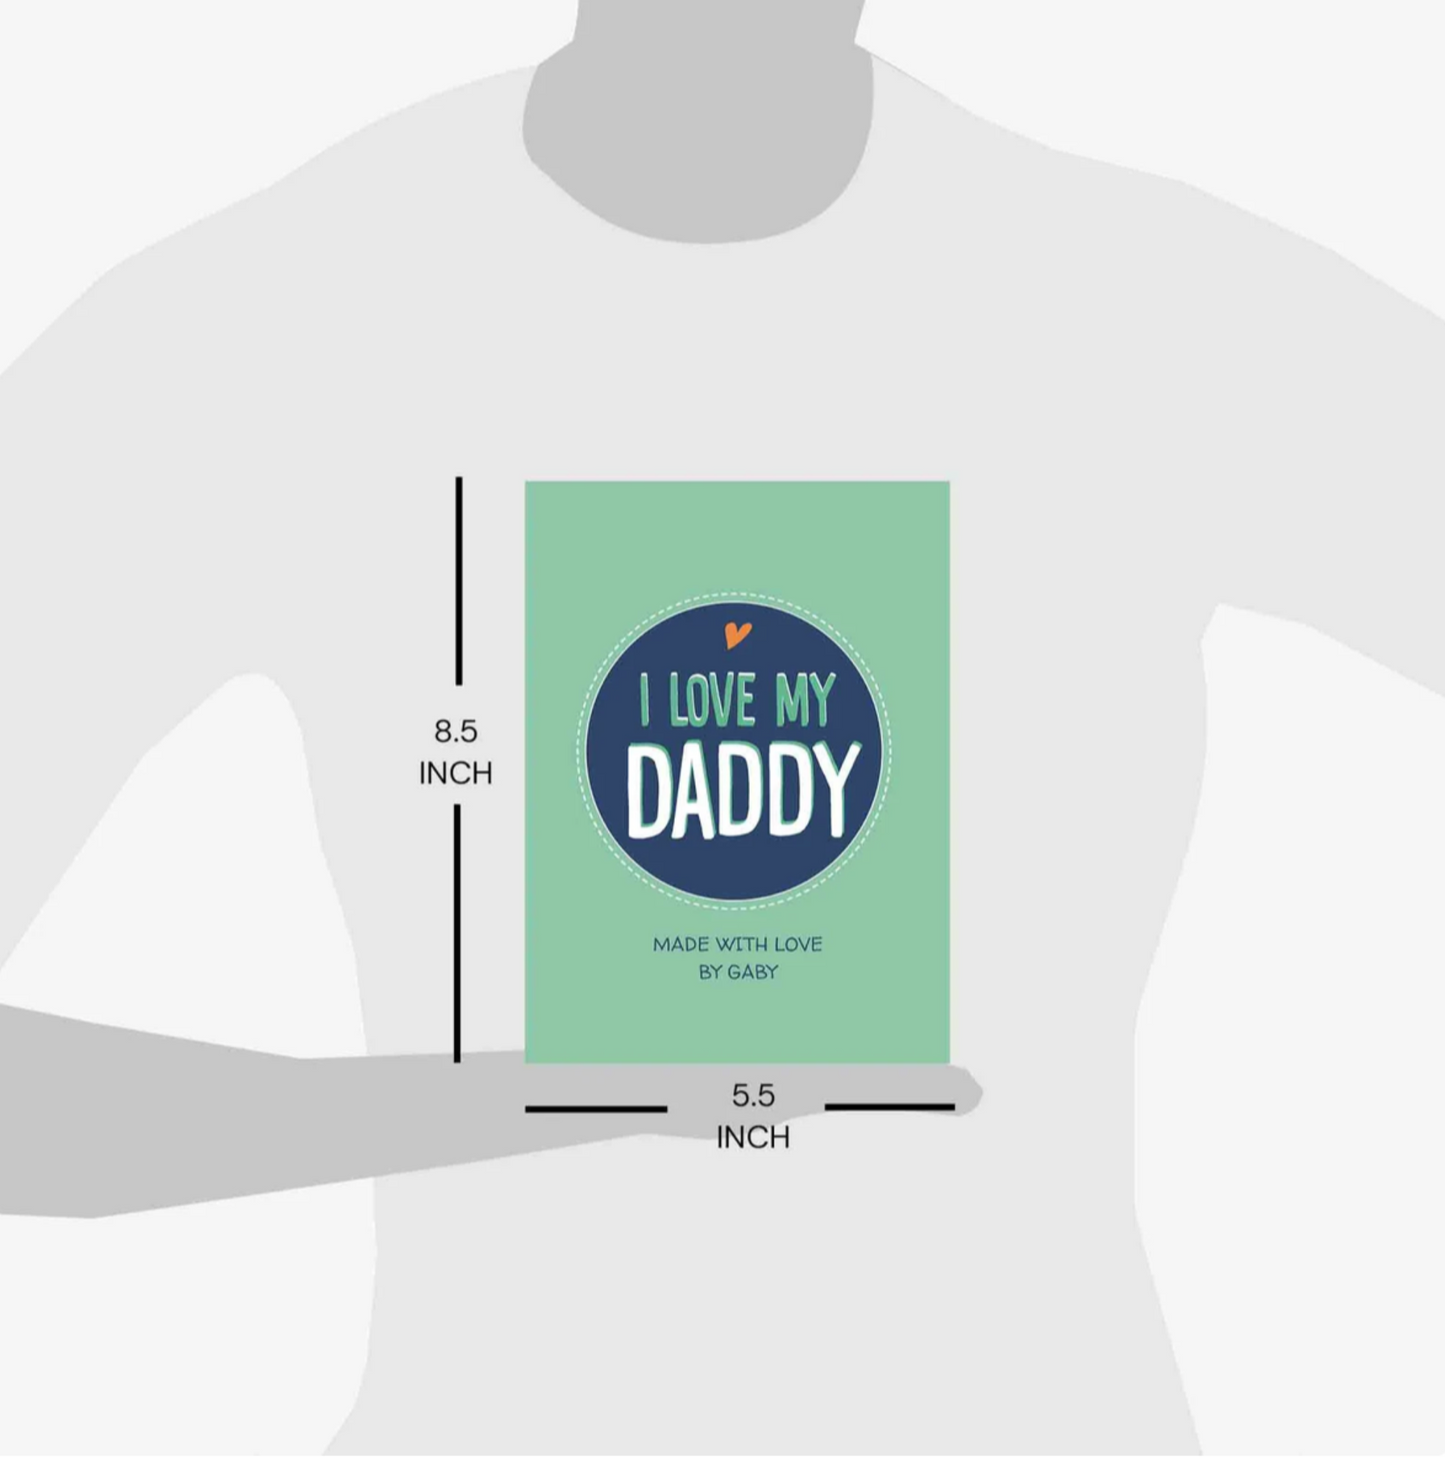 Daddy gift ideas. Book for dad. I love my daddy book size 8.5" x 5.5". Luhvee Books.